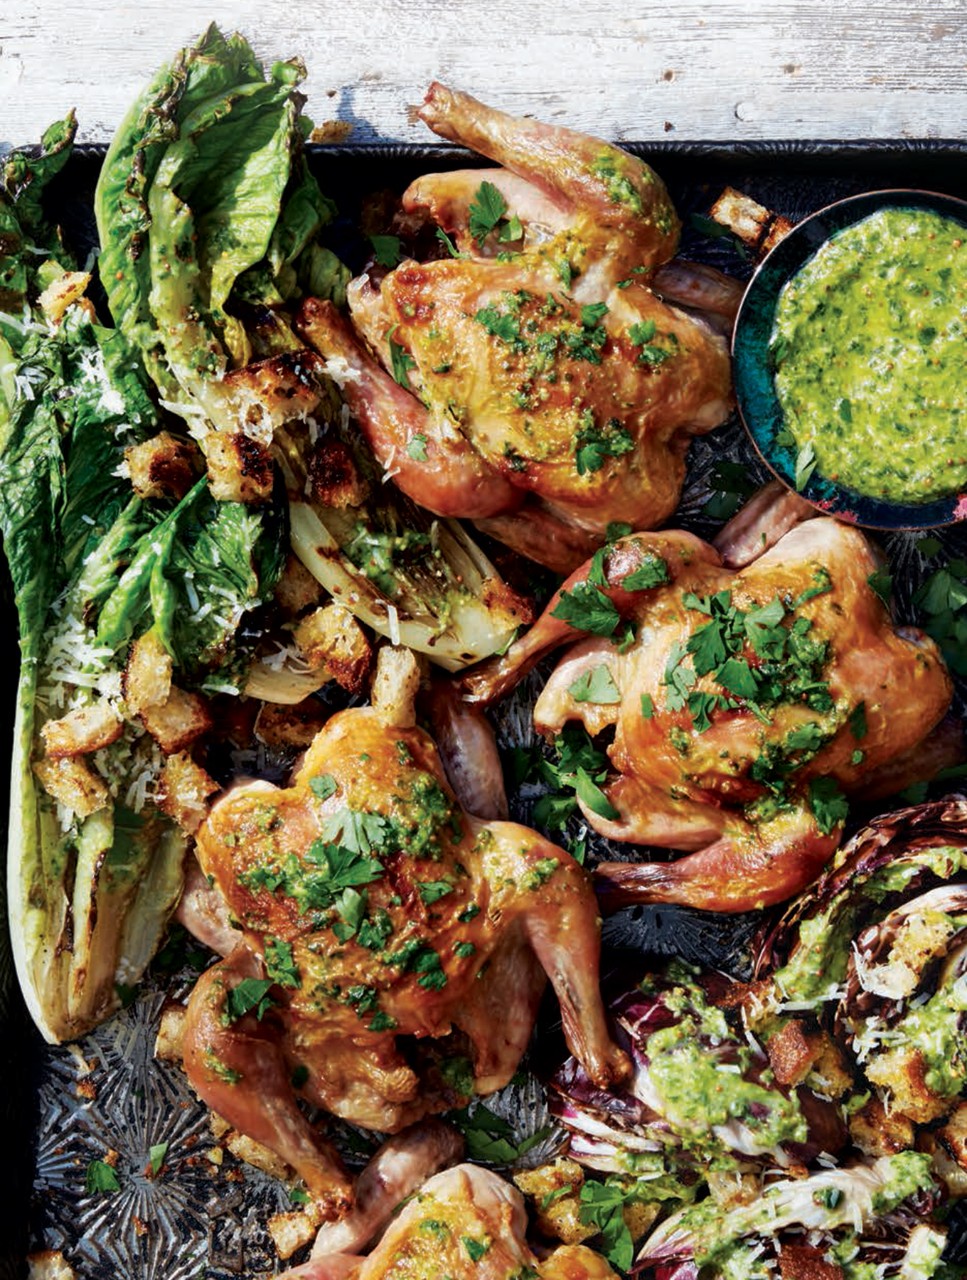 Barbecued Cornish Hen with Grilled Romaine & Radicchio